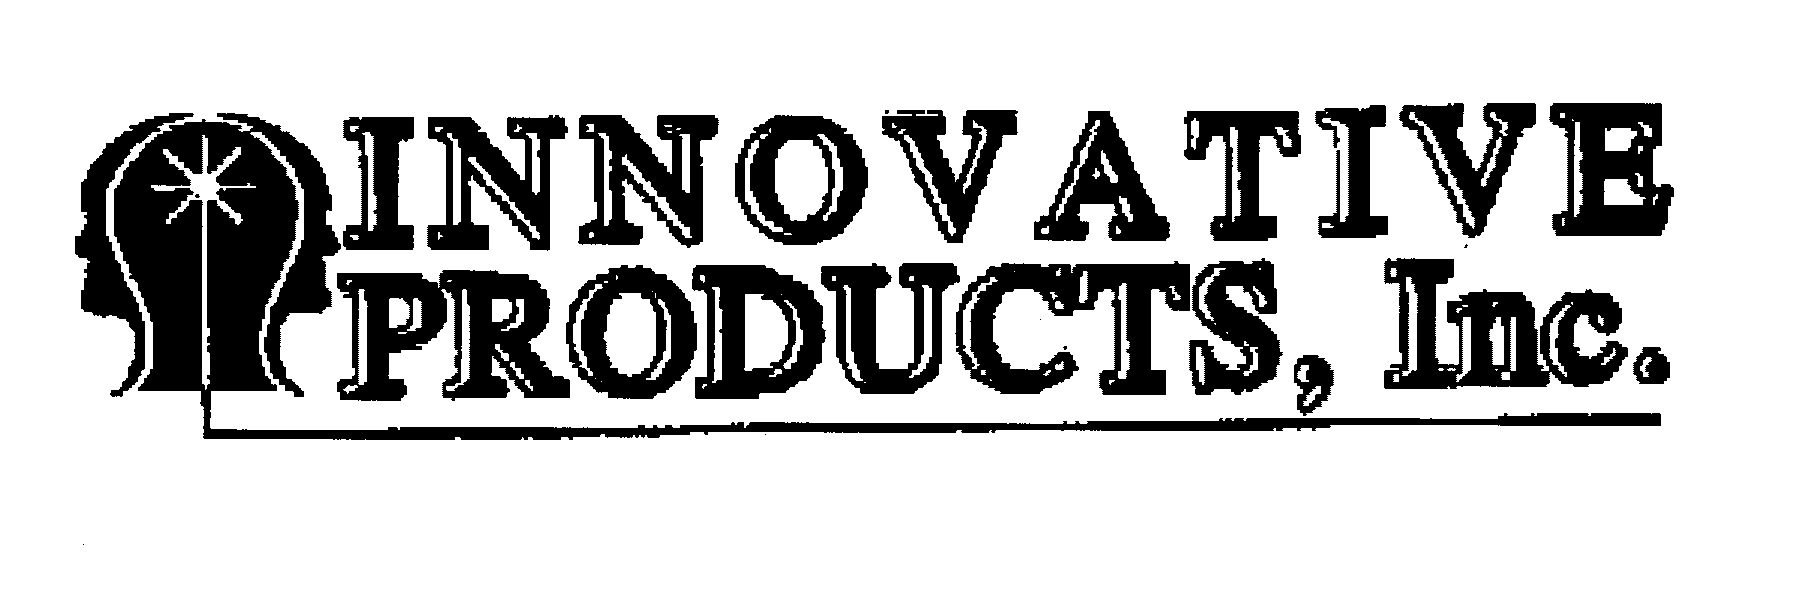  INNOVATIVE PRODUCTS, INC.